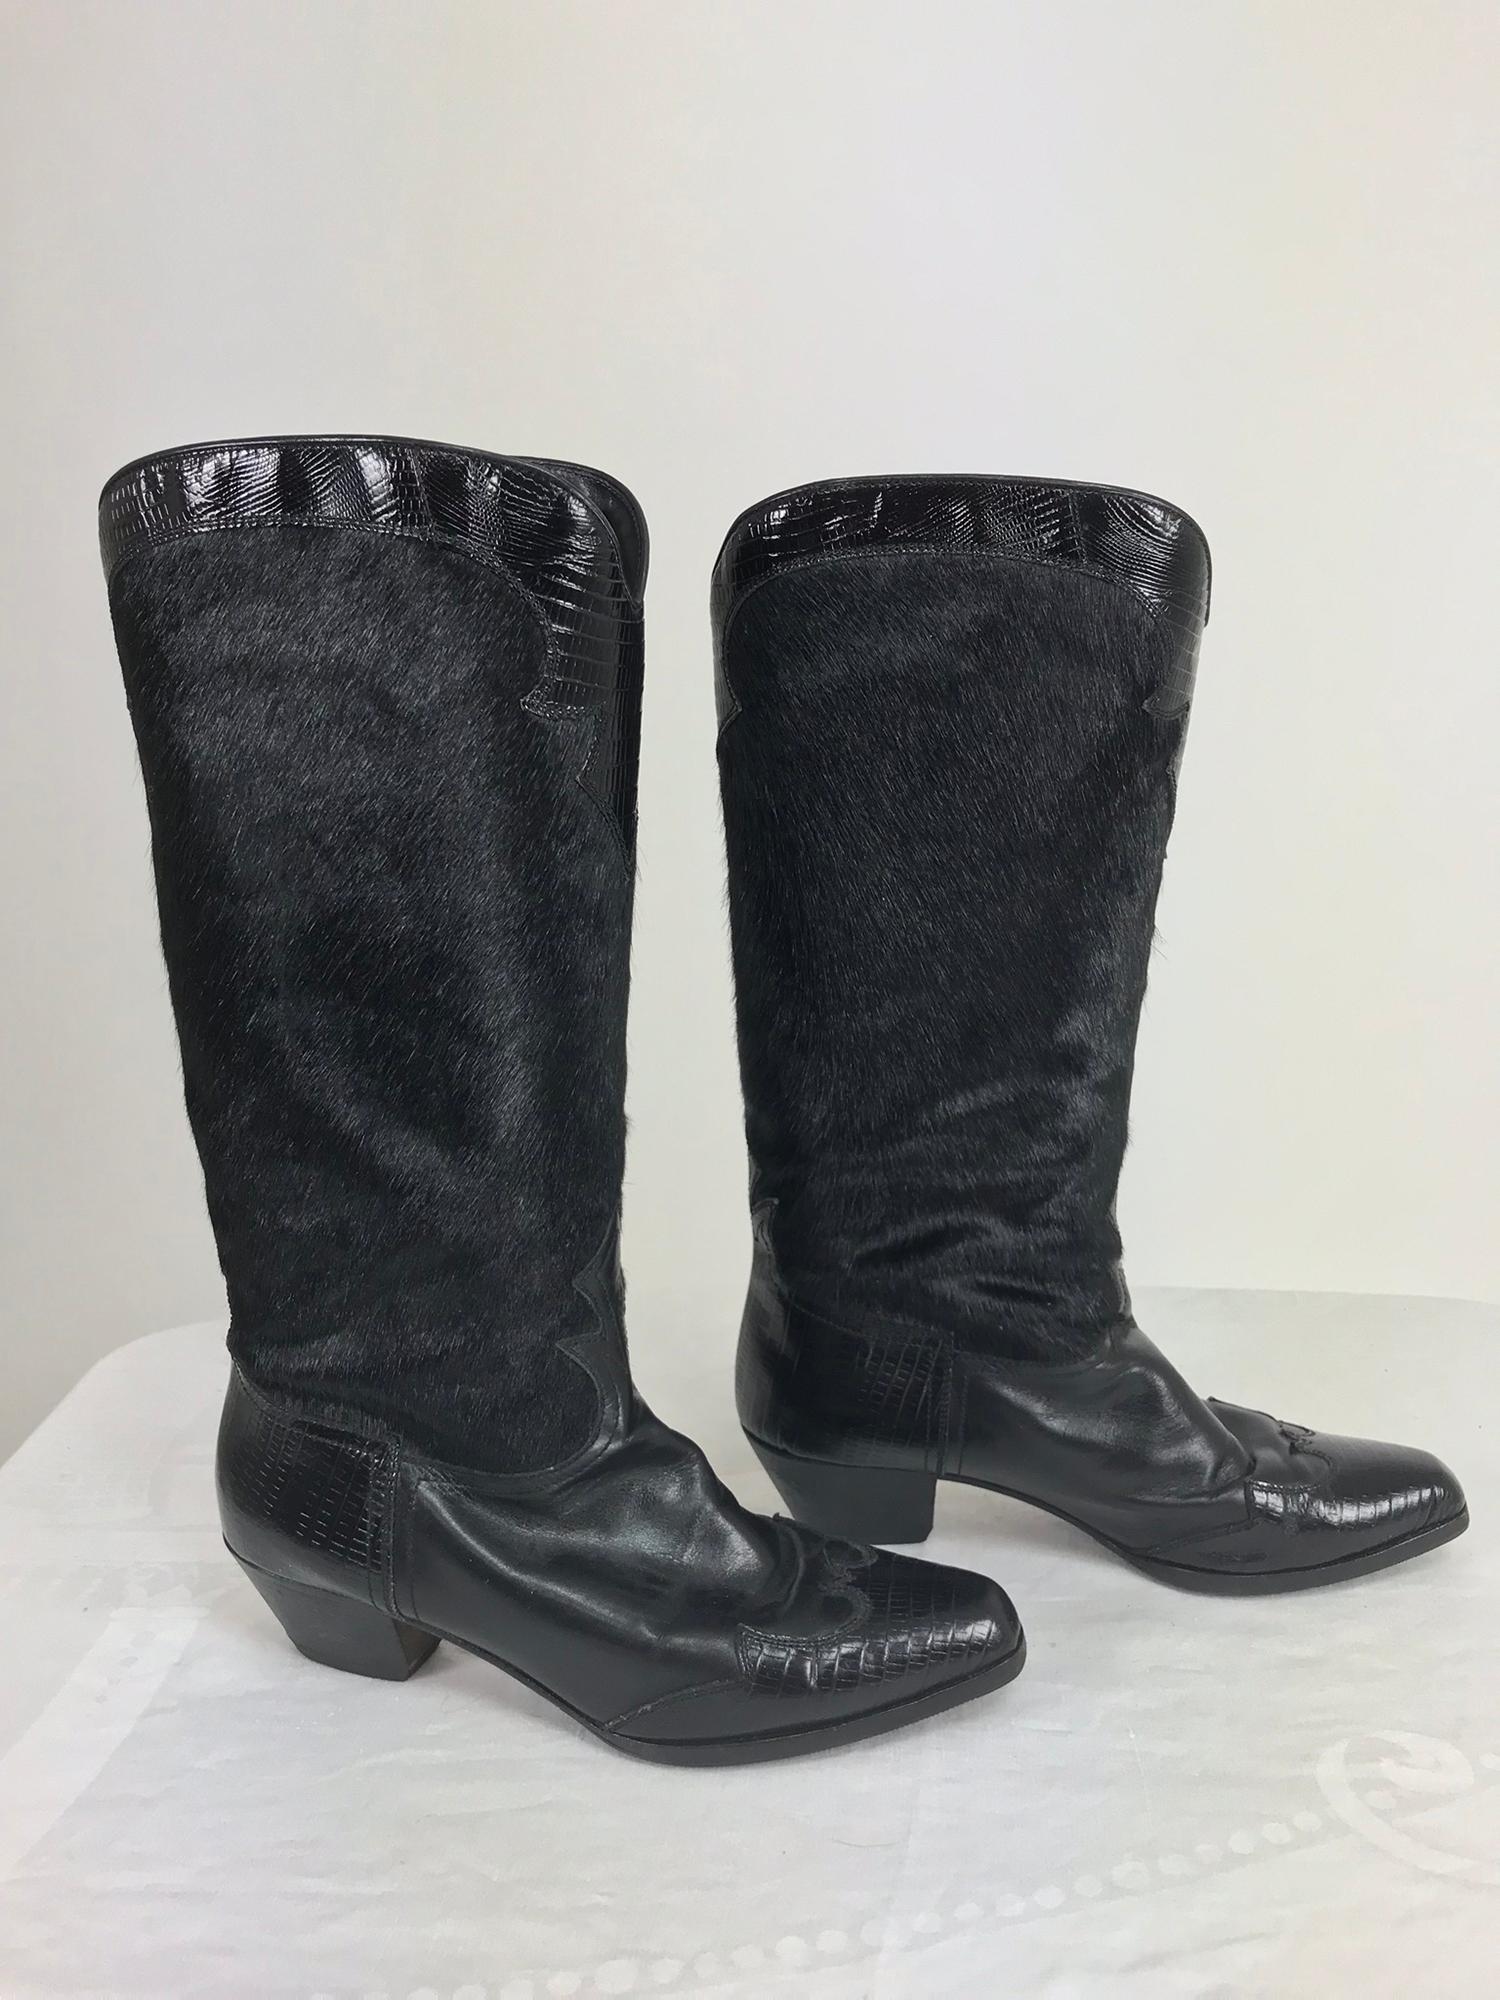 Black embossed alligator leather and black hair calf cowboy boots made for high end boutique, Chez Catherine, Toronto 1980s. Beautiful black boots with embossed leather alligator pattern and shiny black hair calf. These boots are in excellent pre